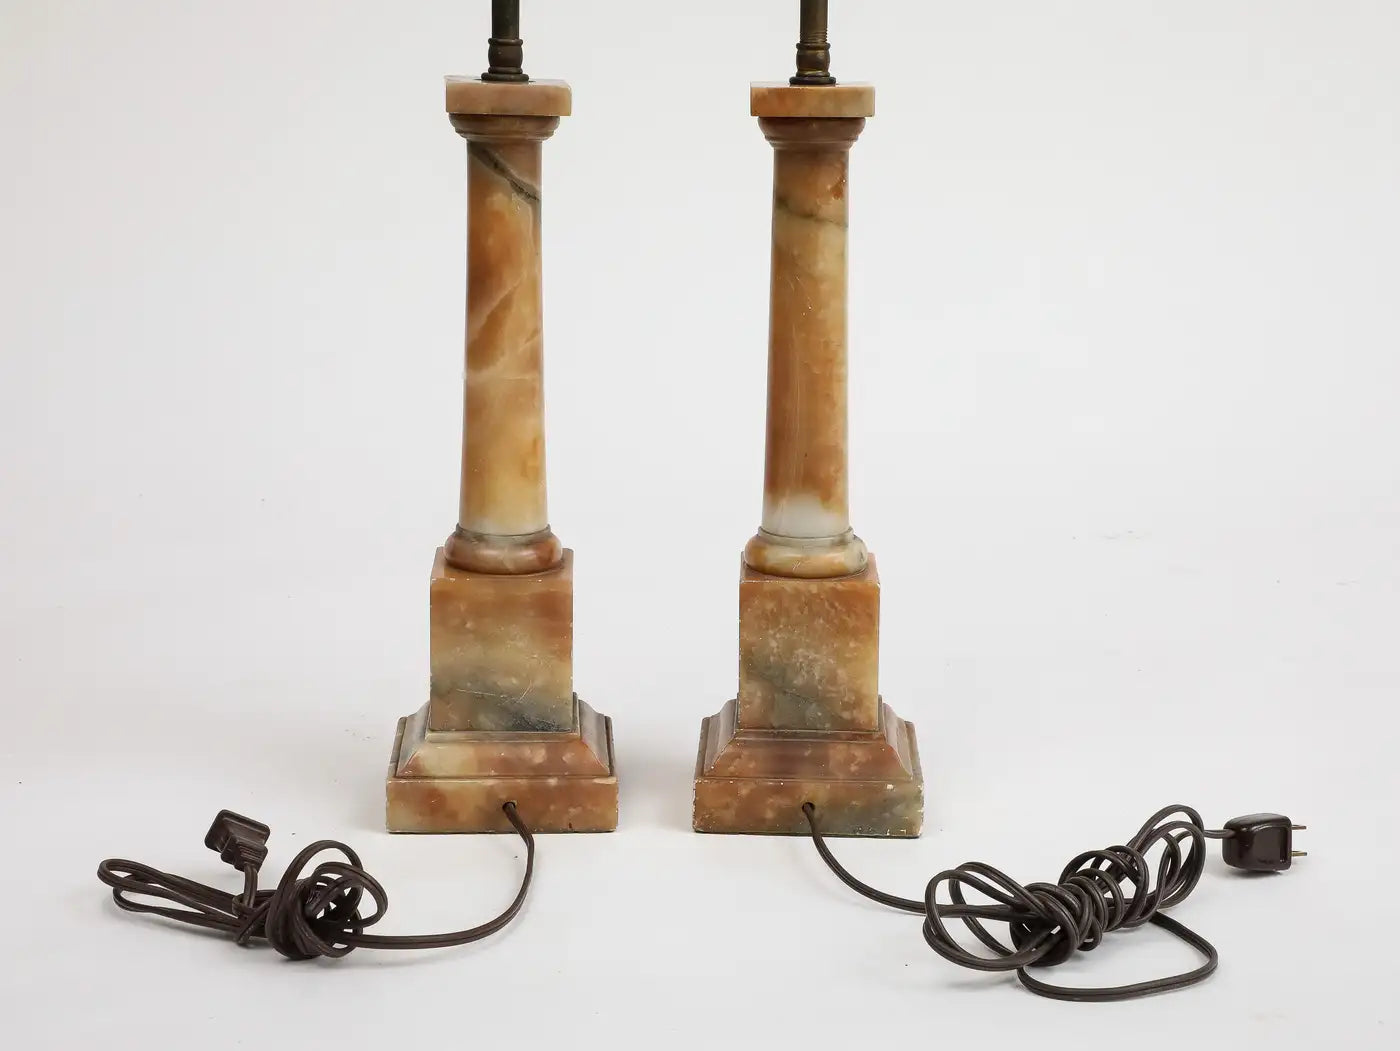 Pair of 1930s Italian Marble Table Lamps